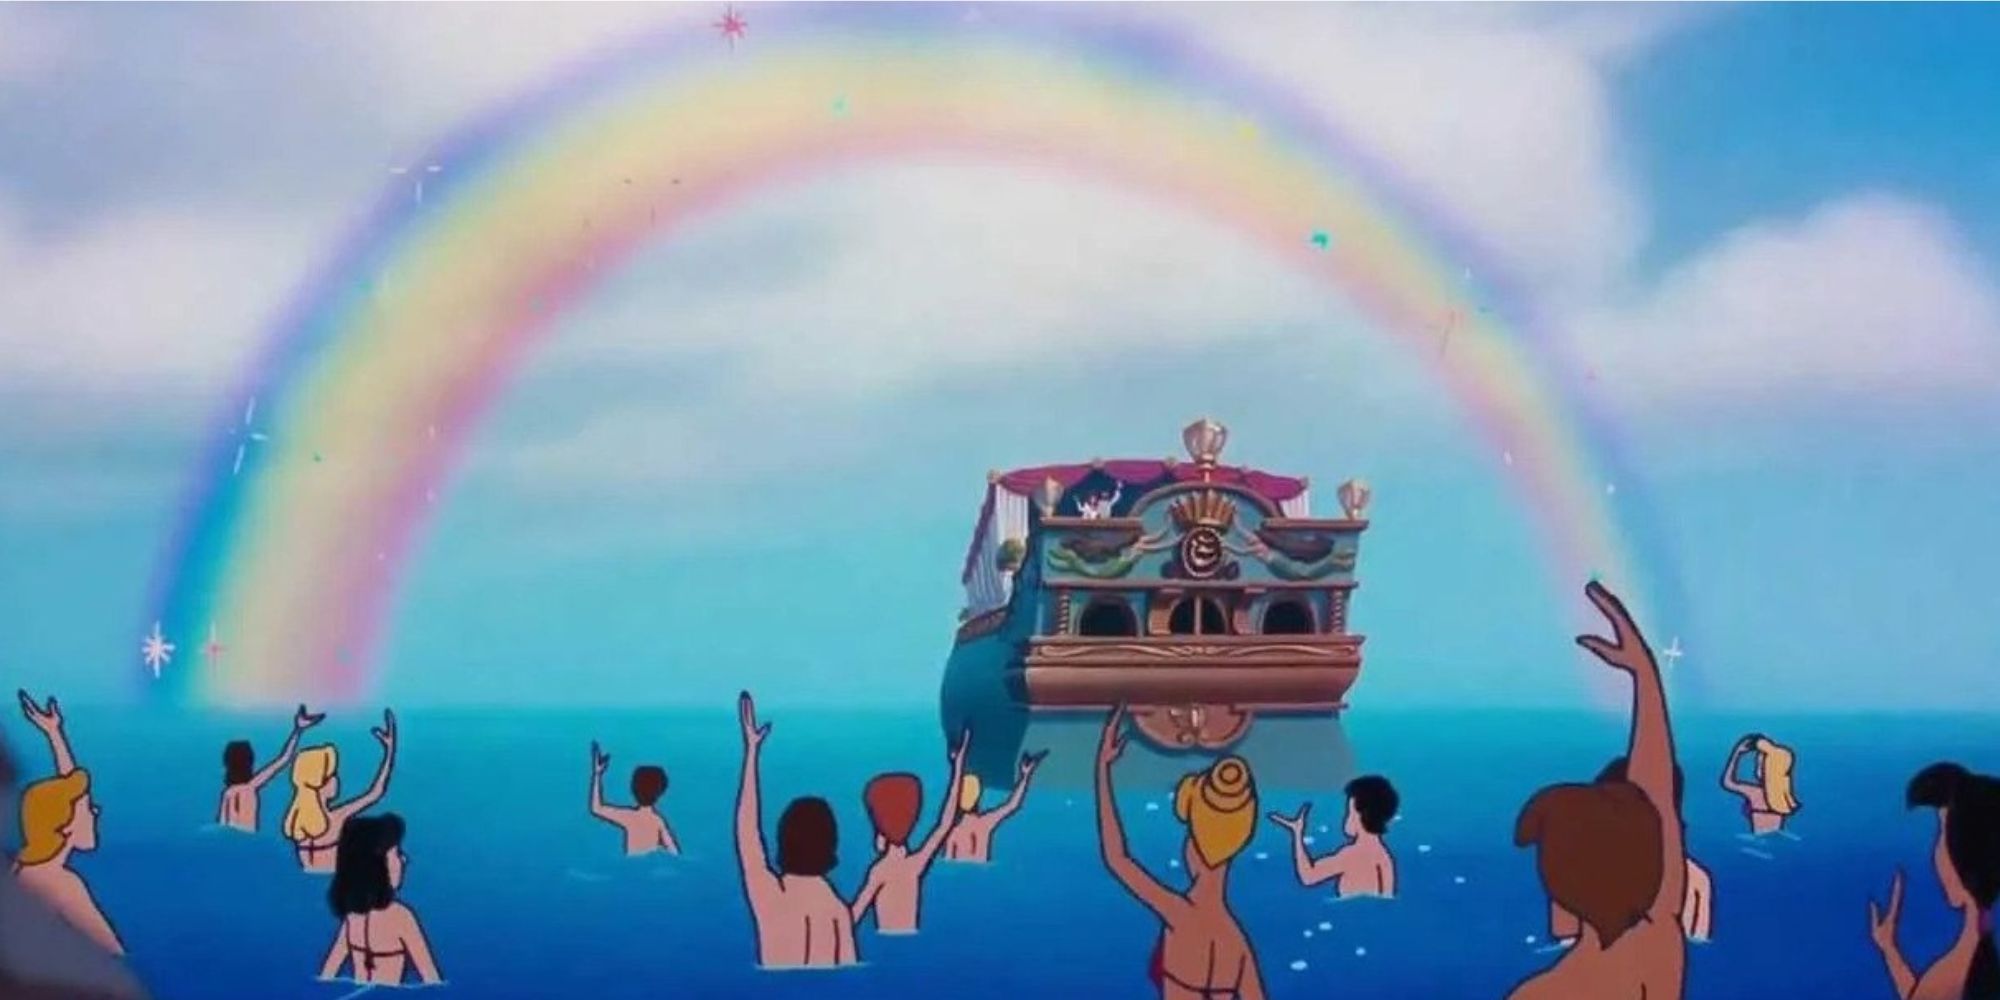 Mermaids in the ocean waving at a boat floating under a rainbow